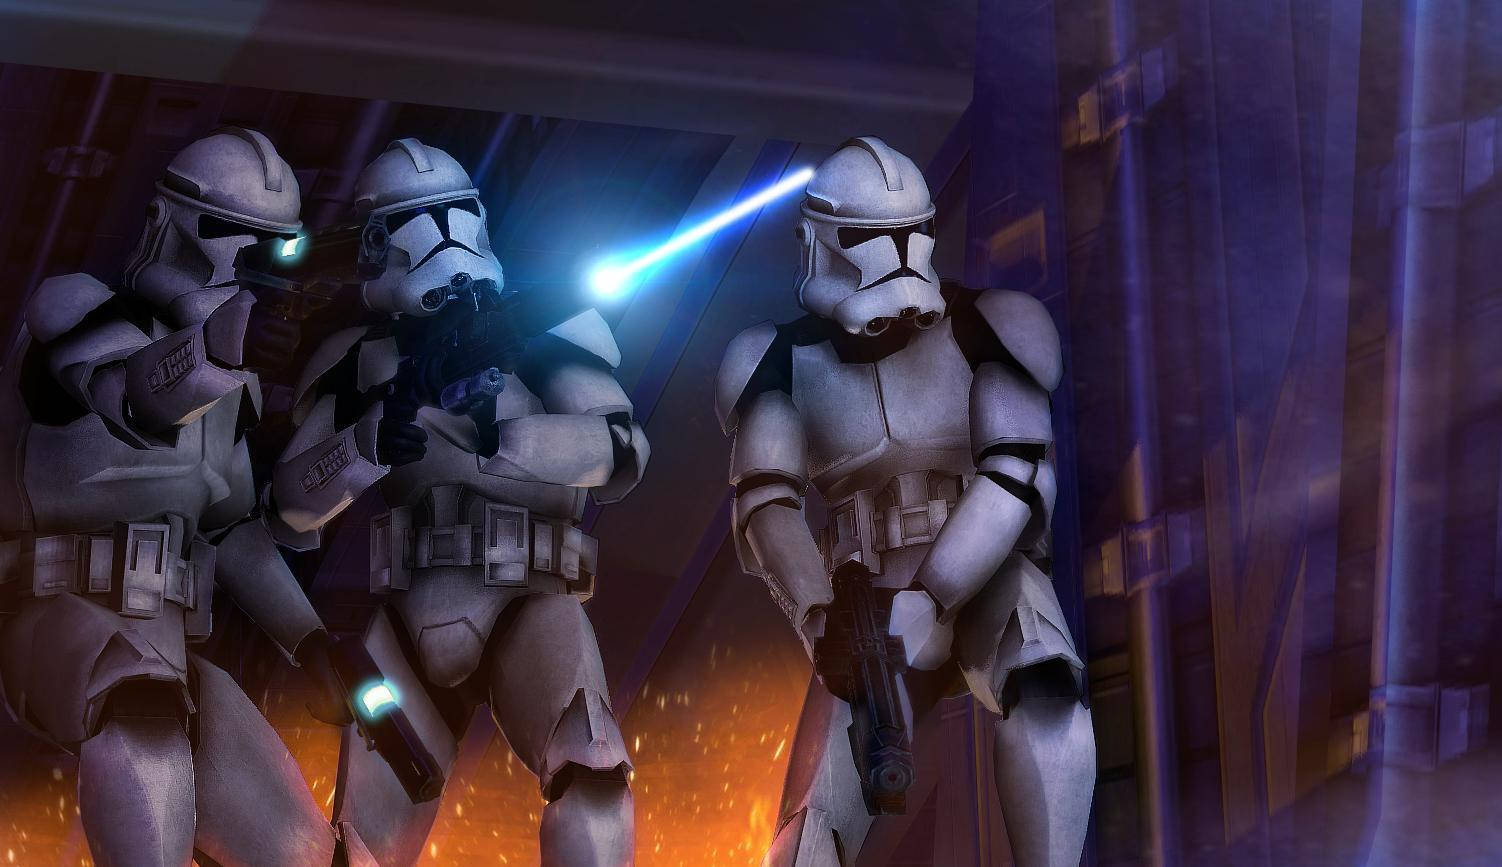 Brave Clone Trooper leads the charge in a daring raid. Wallpaper